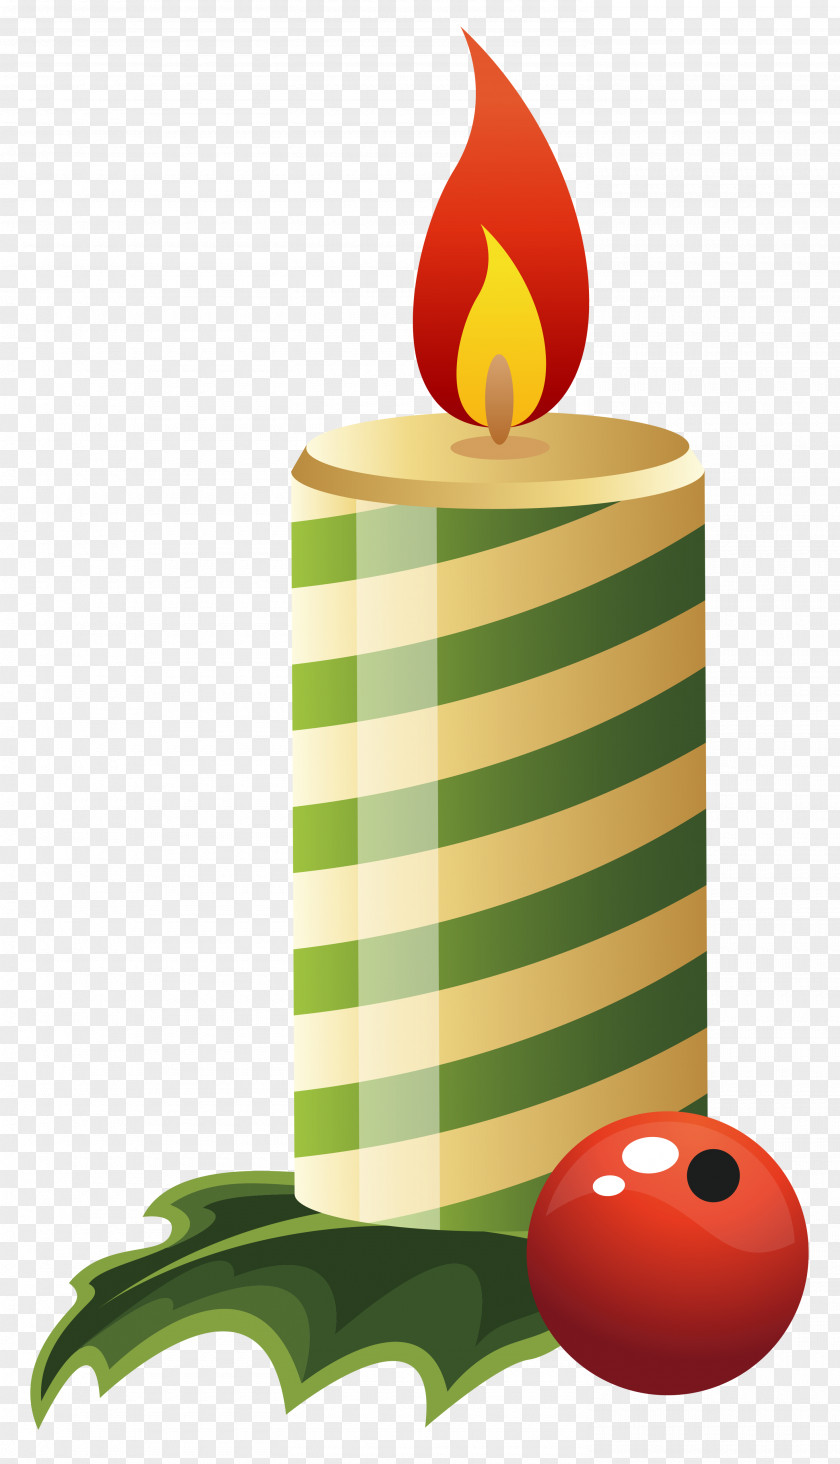 Green Christmas Candle Clipart Image Clip Art PNG